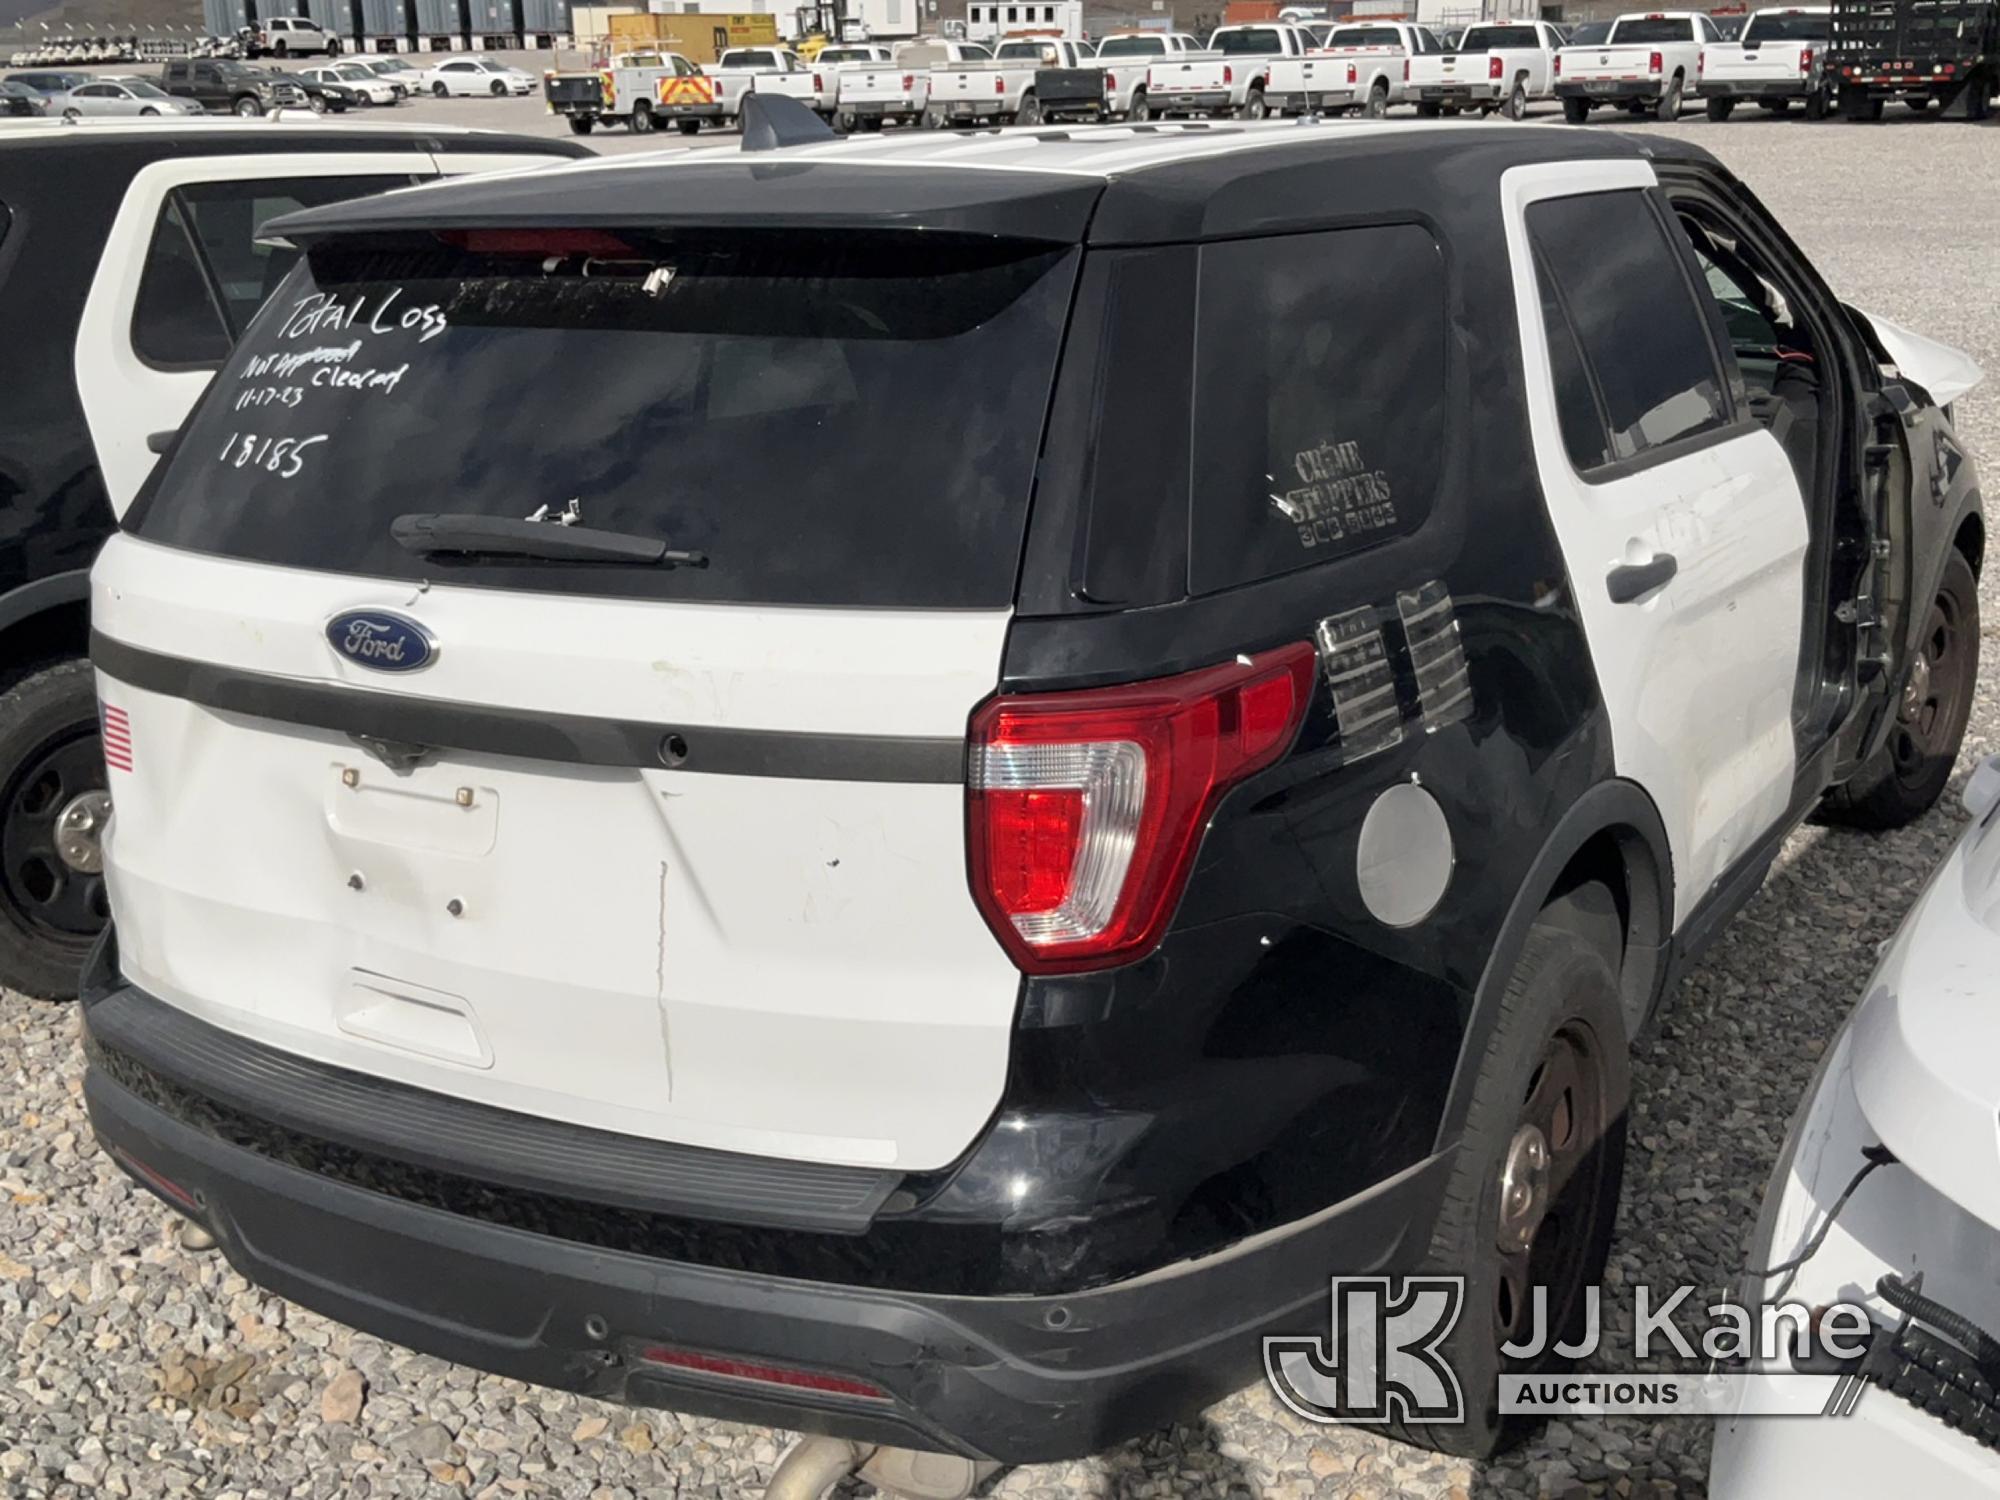 (Las Vegas, NV) 2018 Ford Explorer AWD Police Interceptor Dealers Only, Airbags Deployed, Towed In W